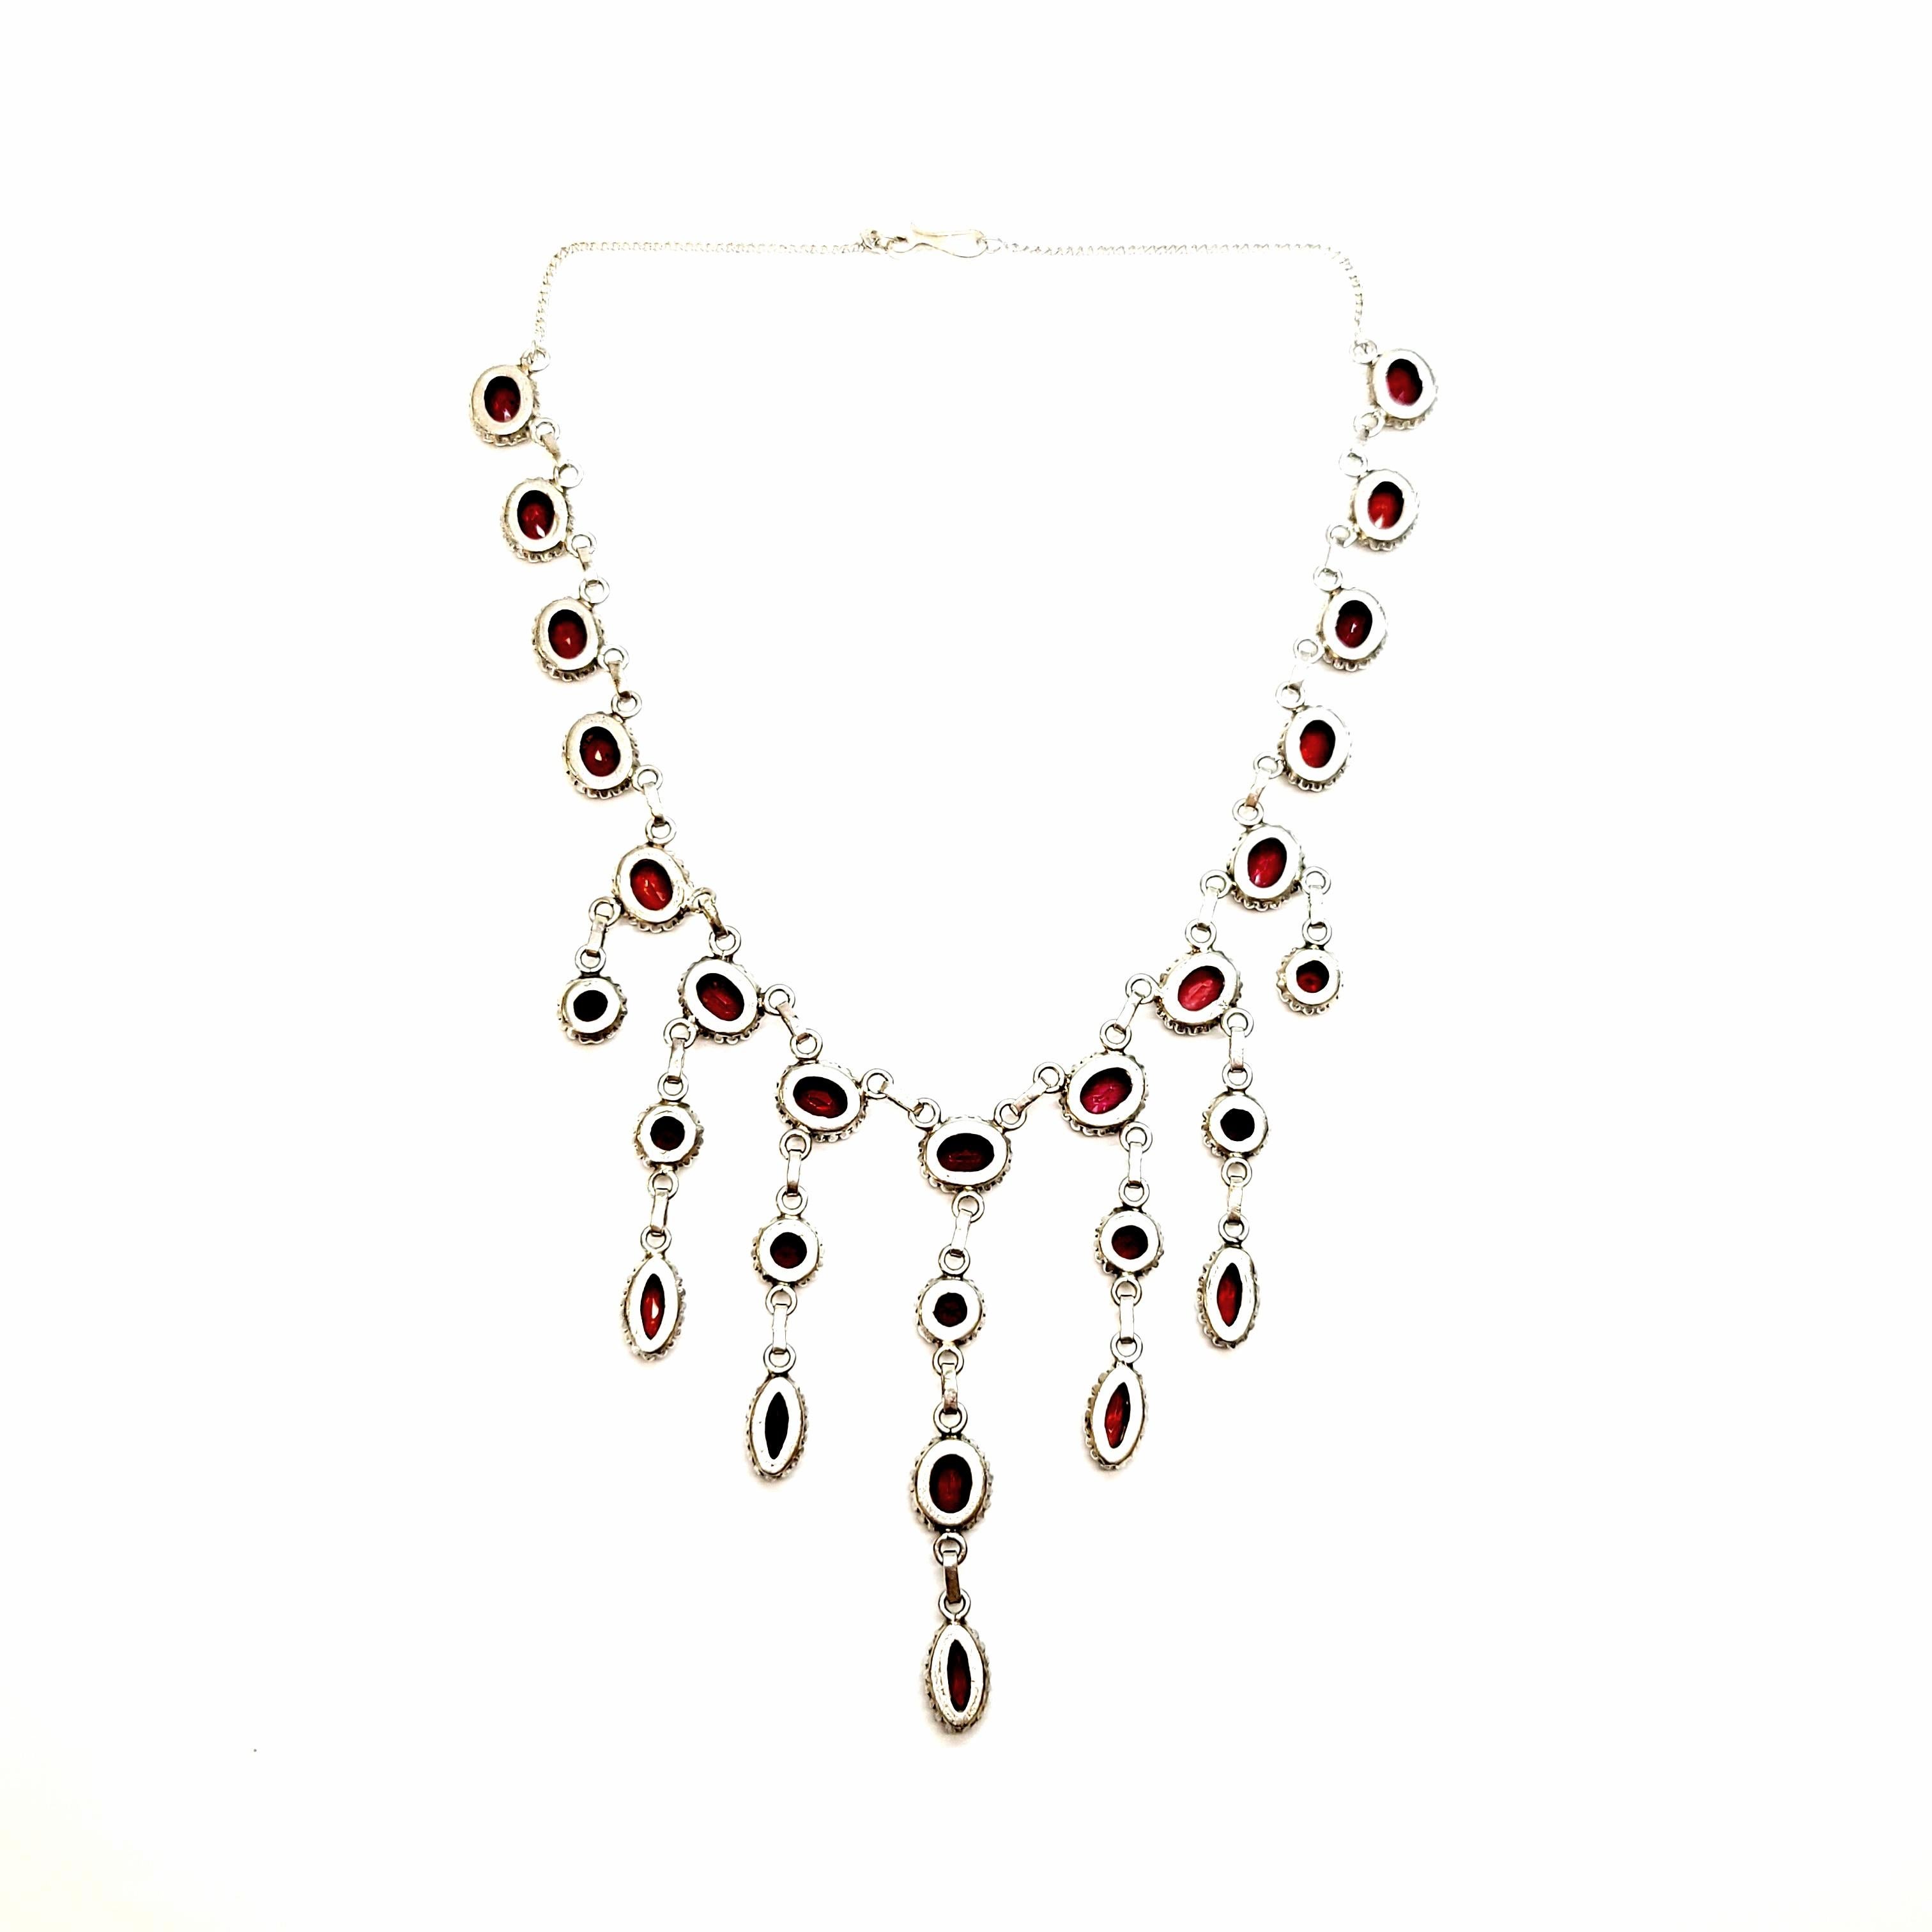 Sterling silver and garnet chandelier necklace.

Beautiful piece featuring bezel set round and marquis shaped garnets hanging from a chandelier style necklace.

Measures approx 15 1/2